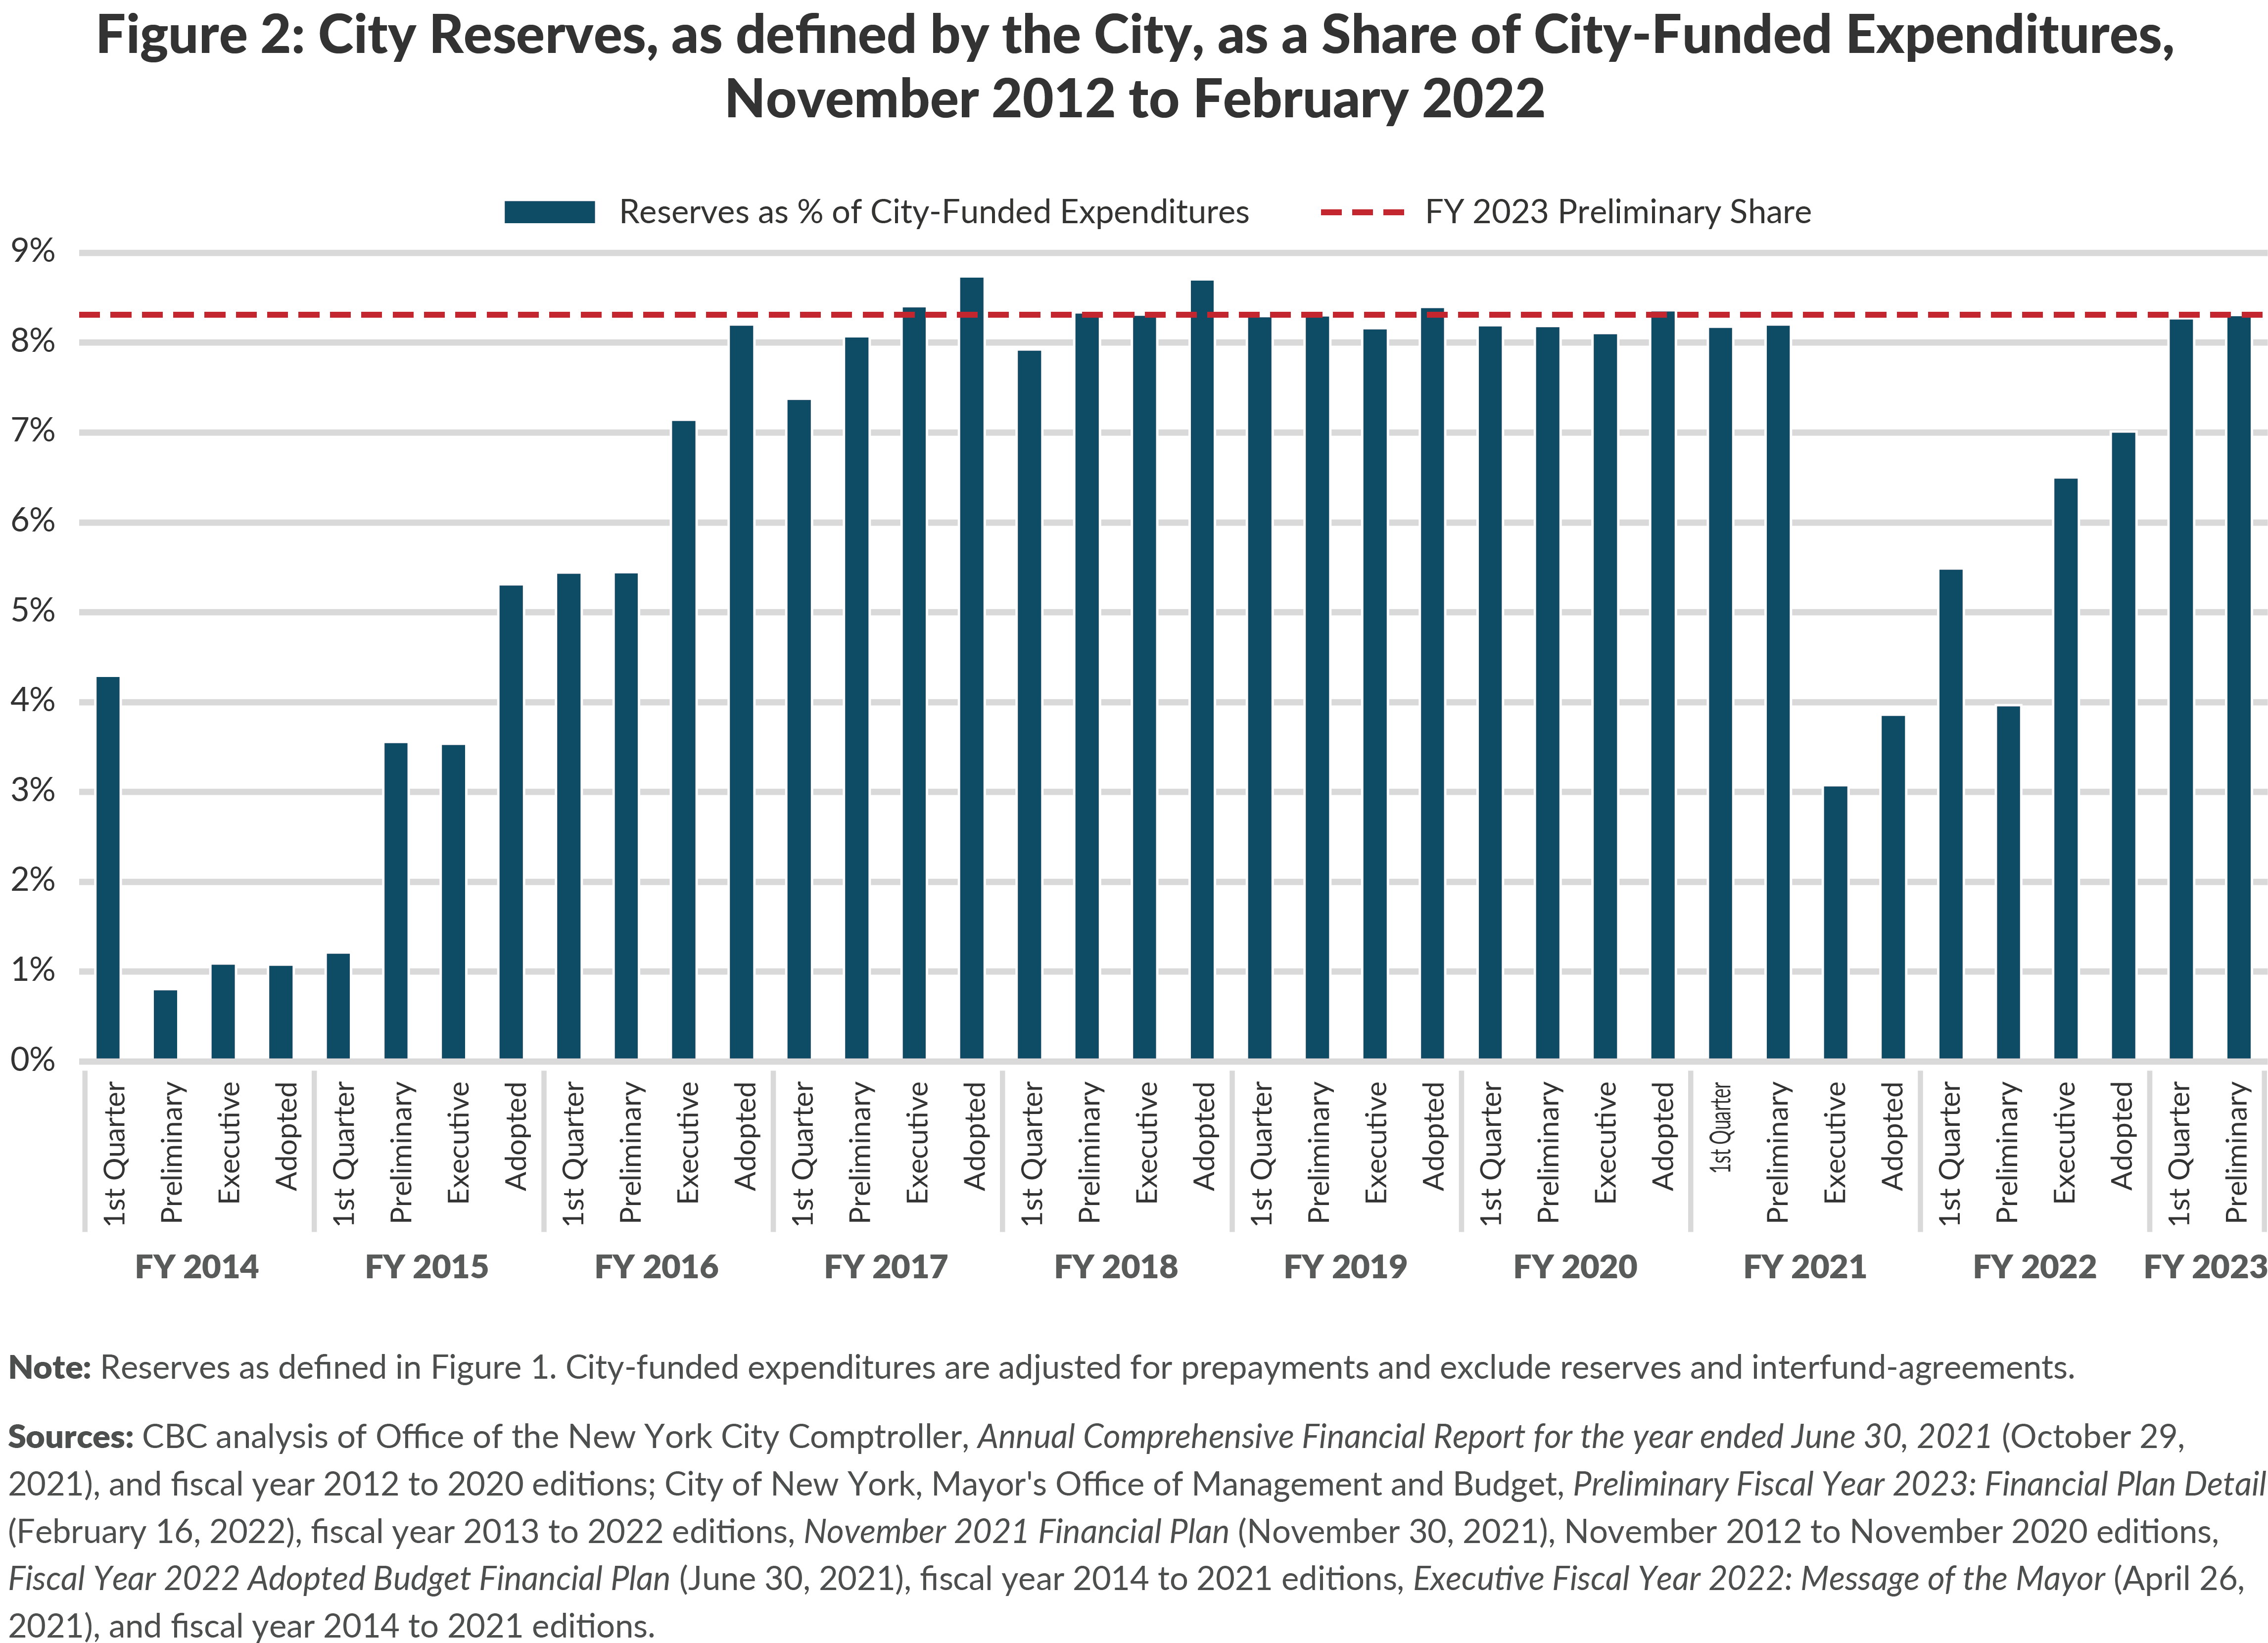 Figure 2: City Reserves, as defined by the City, as a Share of City-Funded Expenditures, November 2012 to February 2022